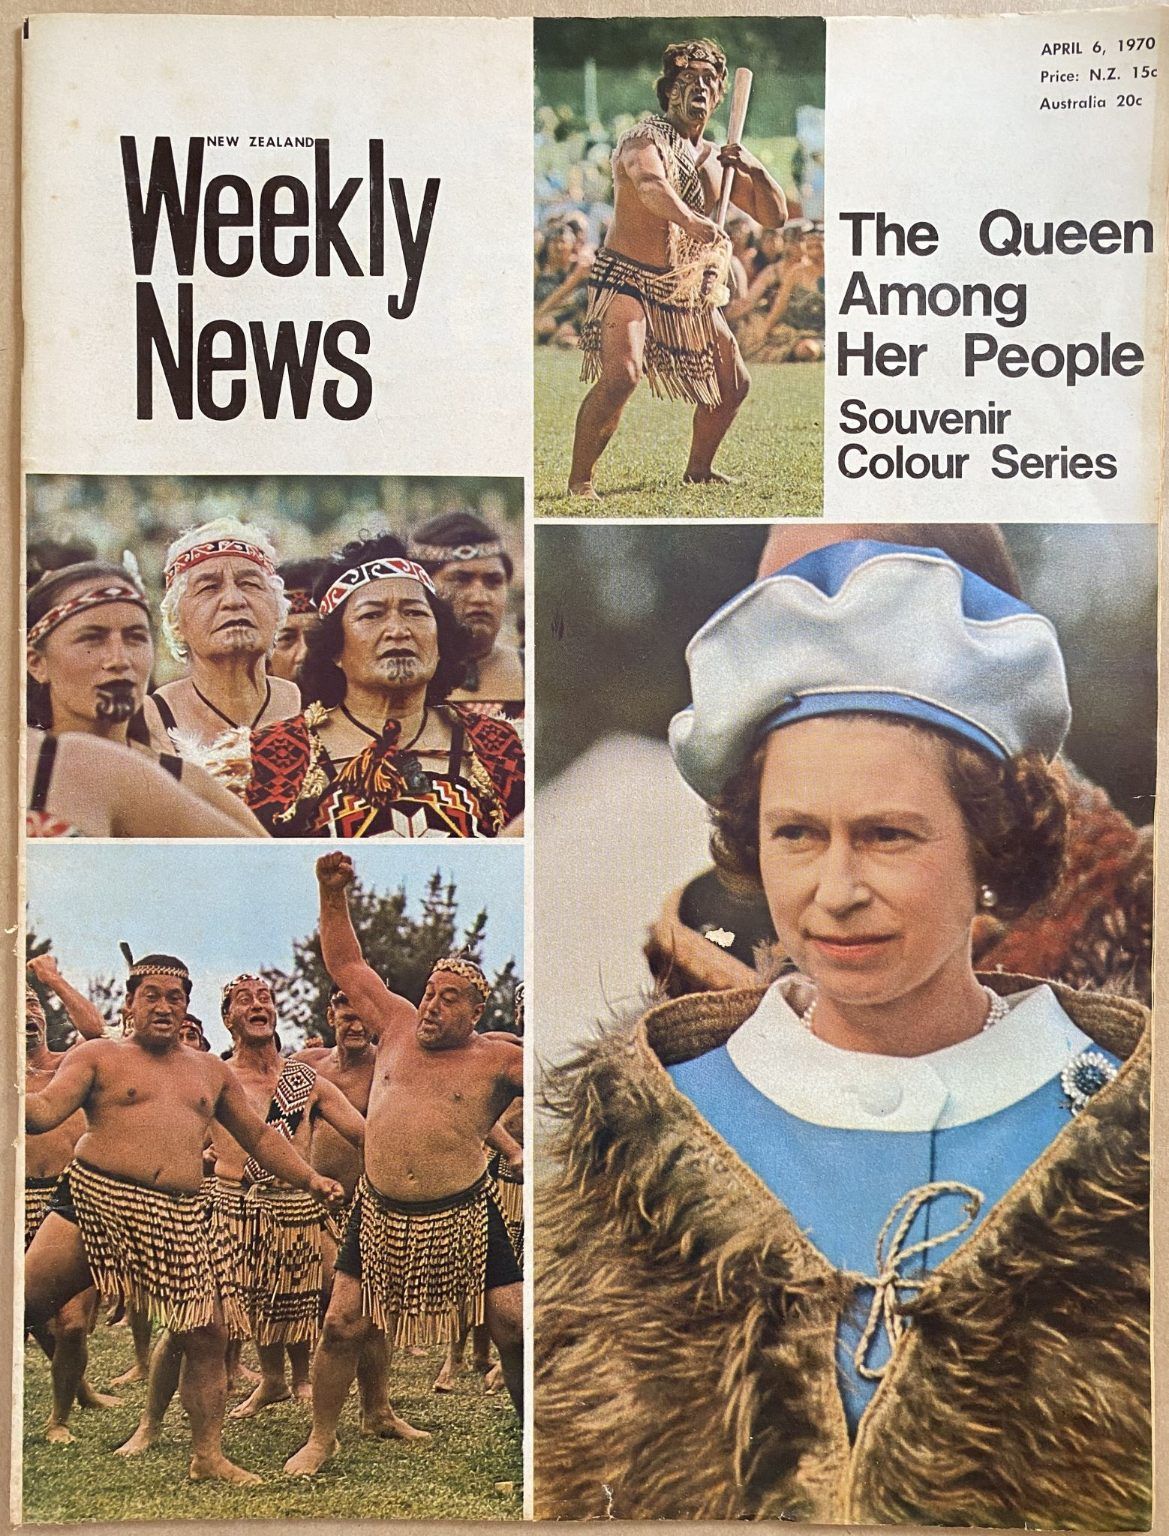 OLD NEWSPAPER: New Zealand Weekly News - No. 5548, 6 April 1970